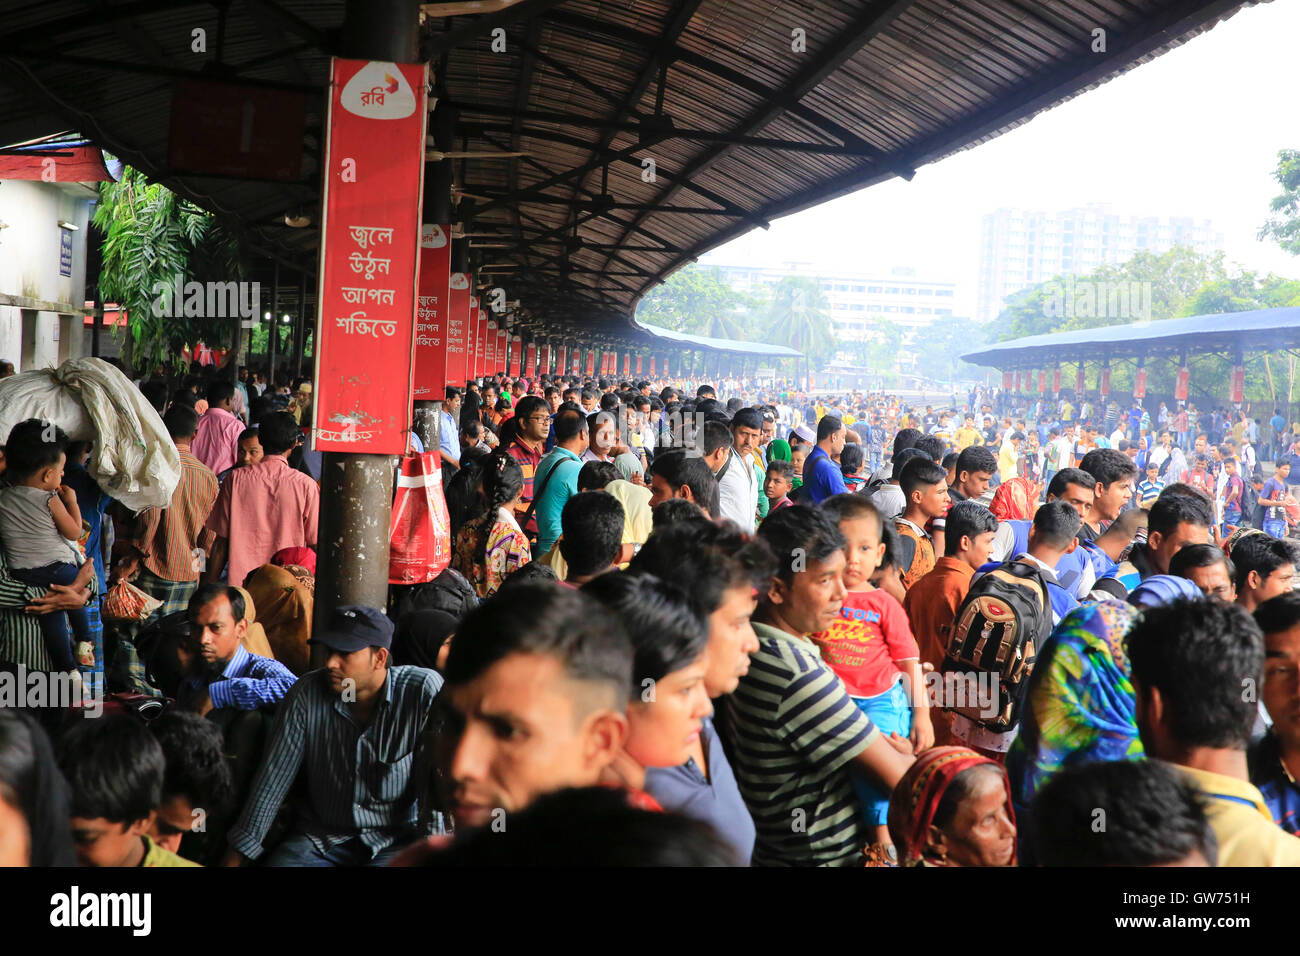 Dhaka, Bangladesh. 12 September, 2016: People wait at the Airport Railway station for a train to reach village home to spend Eid-ul-Azha holidays. Stock Photo